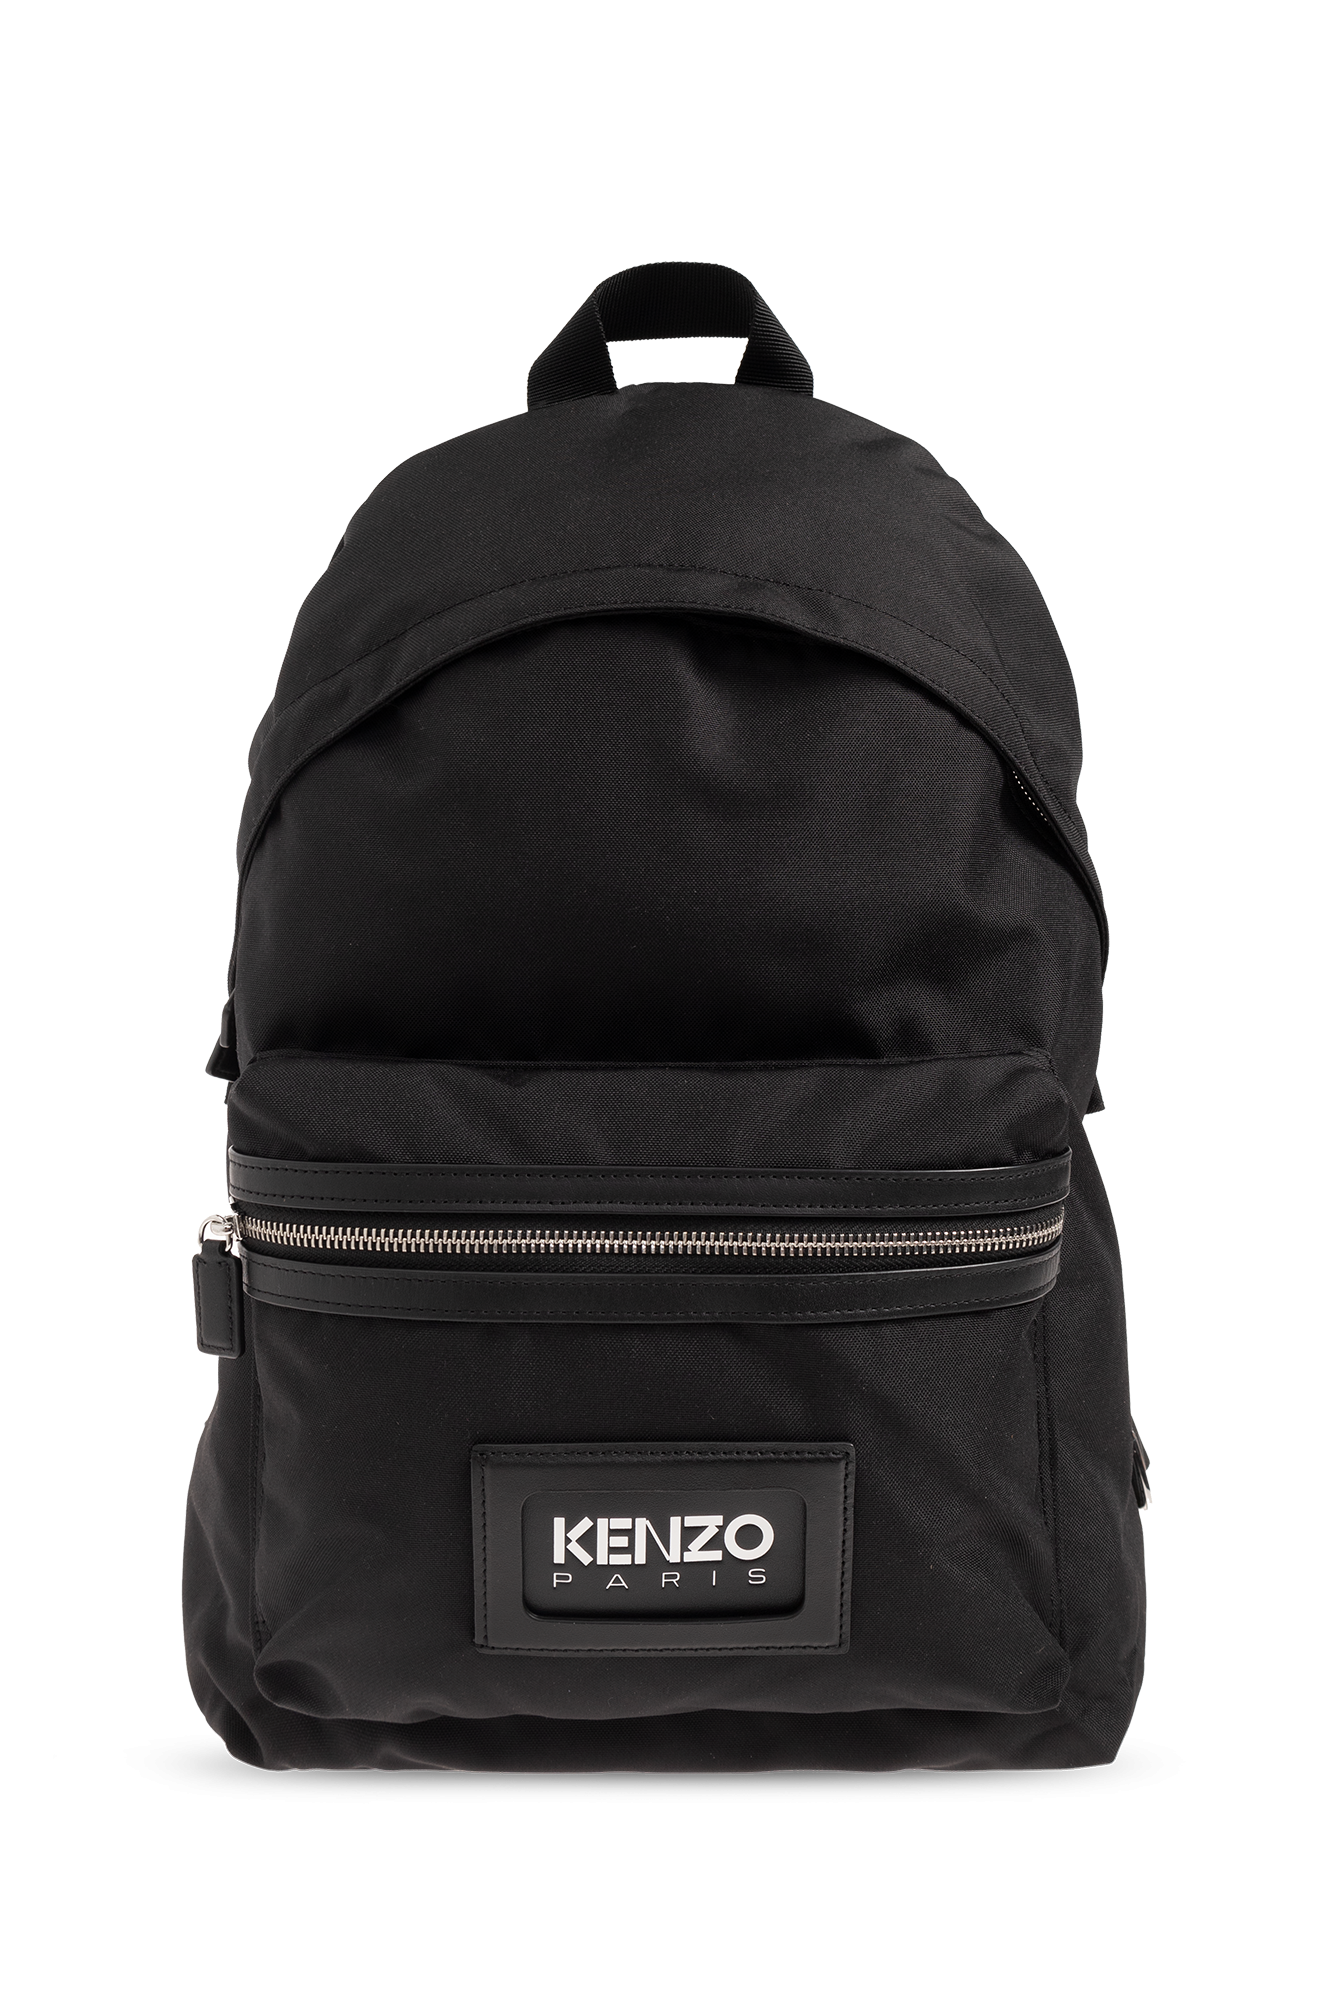 Kenzo backpack 3rd with logo